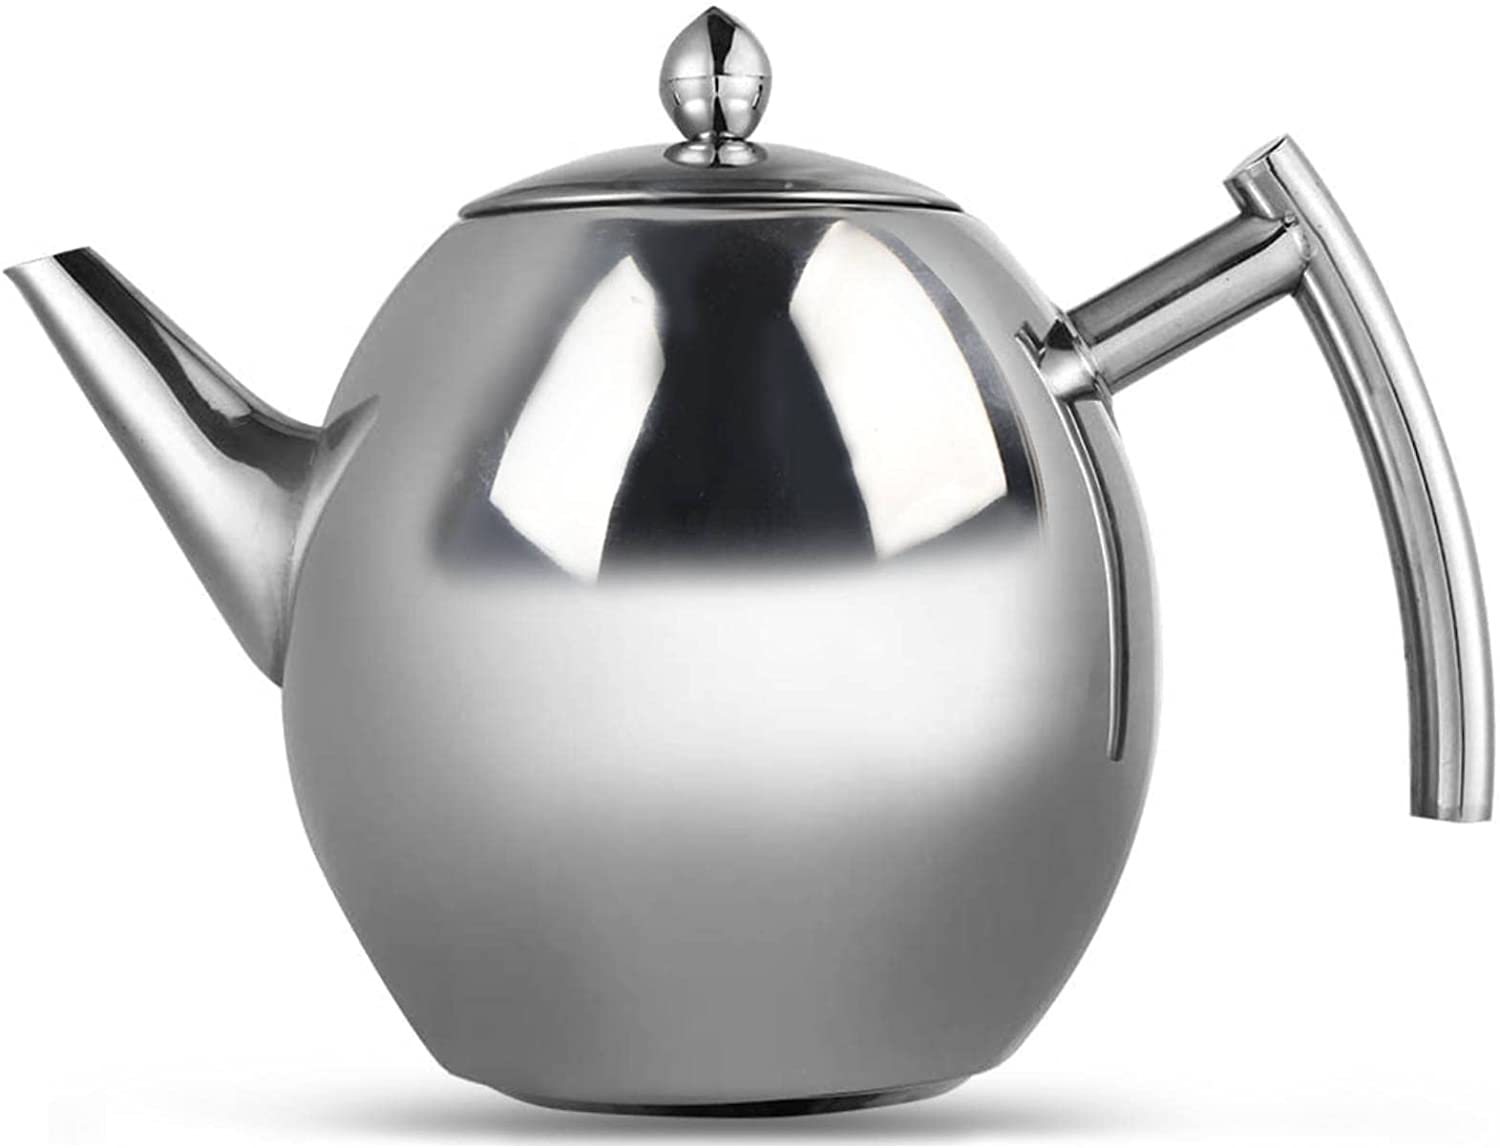 Garsent Stainless Steel Teapot with Strainer, Small Coffee Teapot with Tea Strainer for Home Hotel